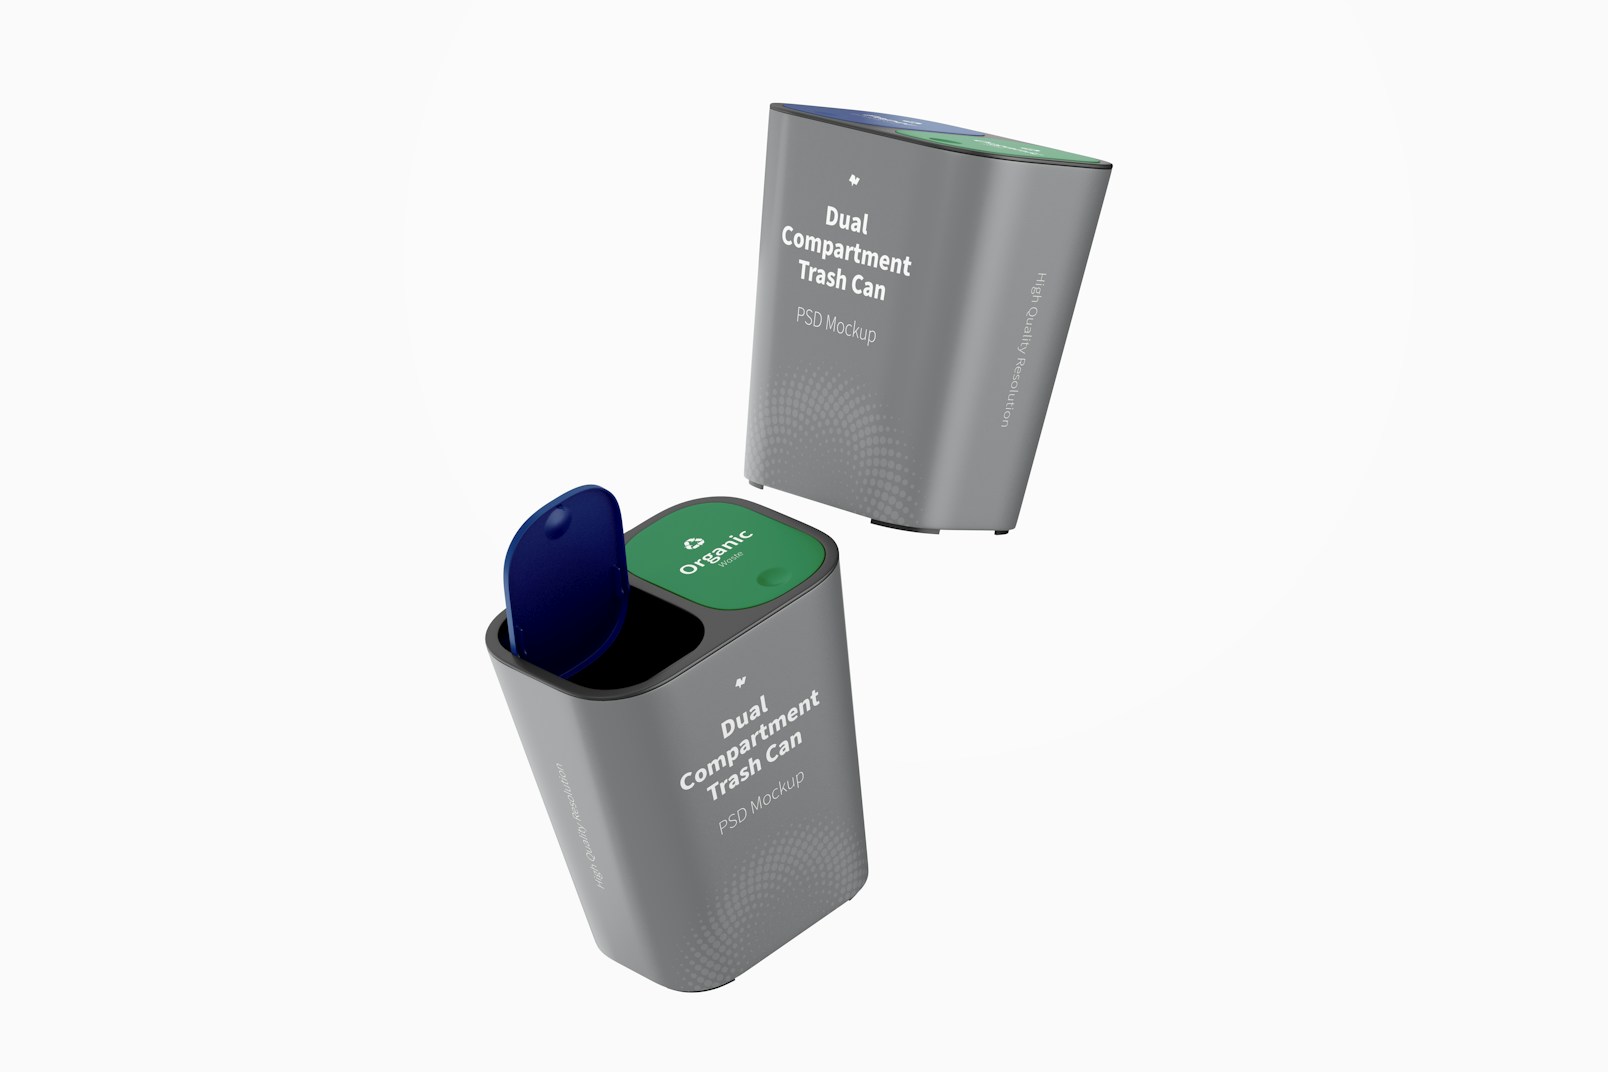 Dual Compartment Trash Cans Mockup, Floating